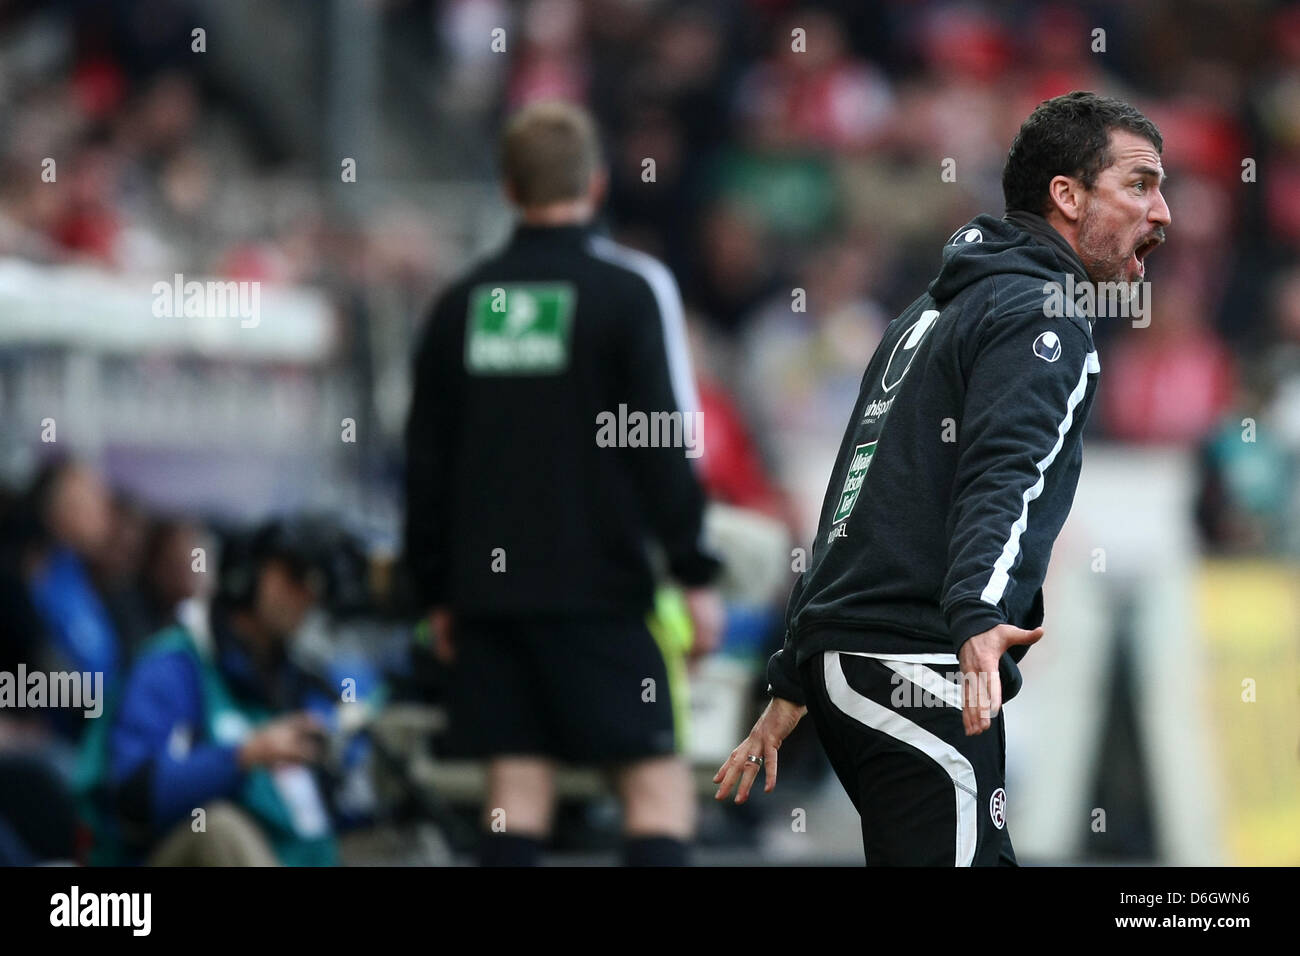 Kaiserslautern's head coach Marco Kurz gestures during the German Bundesliga match between 1. FSV Mainz 05 and 1. FC Kaiserslautern at the Coface Arena in Mainz, Germany, 25 February 2012. Photo: FREDRIK VON ERICHSEN    (ATTENTION: EMBARGO CONDITIONS! The DFL permits the further  utilisation of the pictures in IPTV, mobile services and other new  technologies only no earlier than t Stock Photo